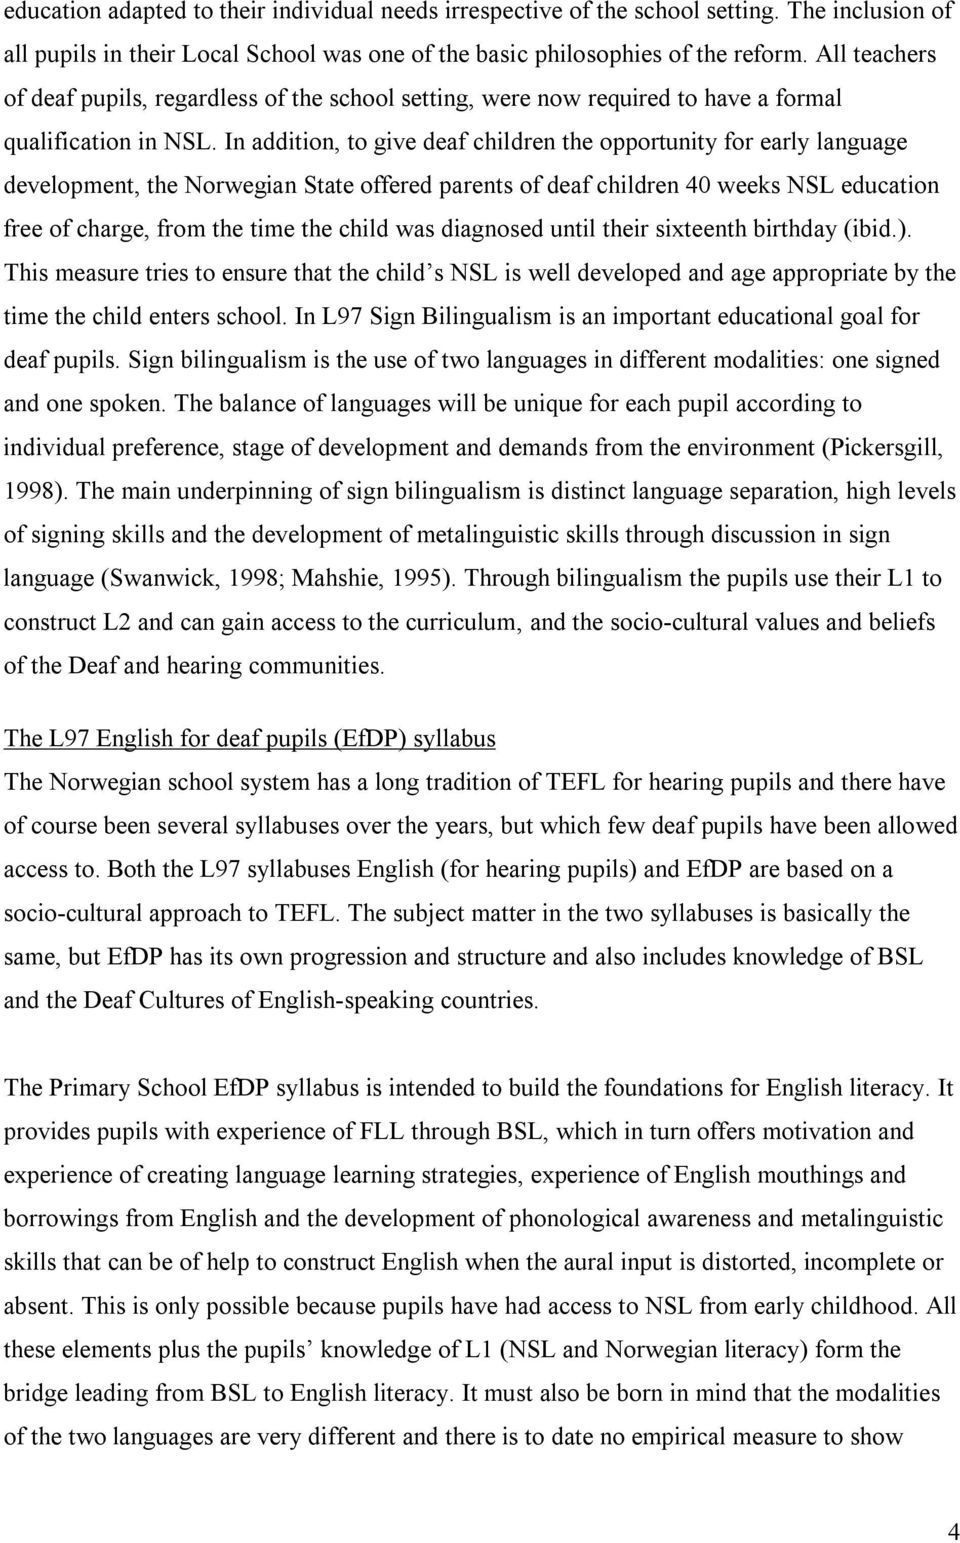 In addition, to give deaf children the opportunity for early language development, the Norwegian State offered parents of deaf children 40 weeks NSL education free of charge, from the time the child